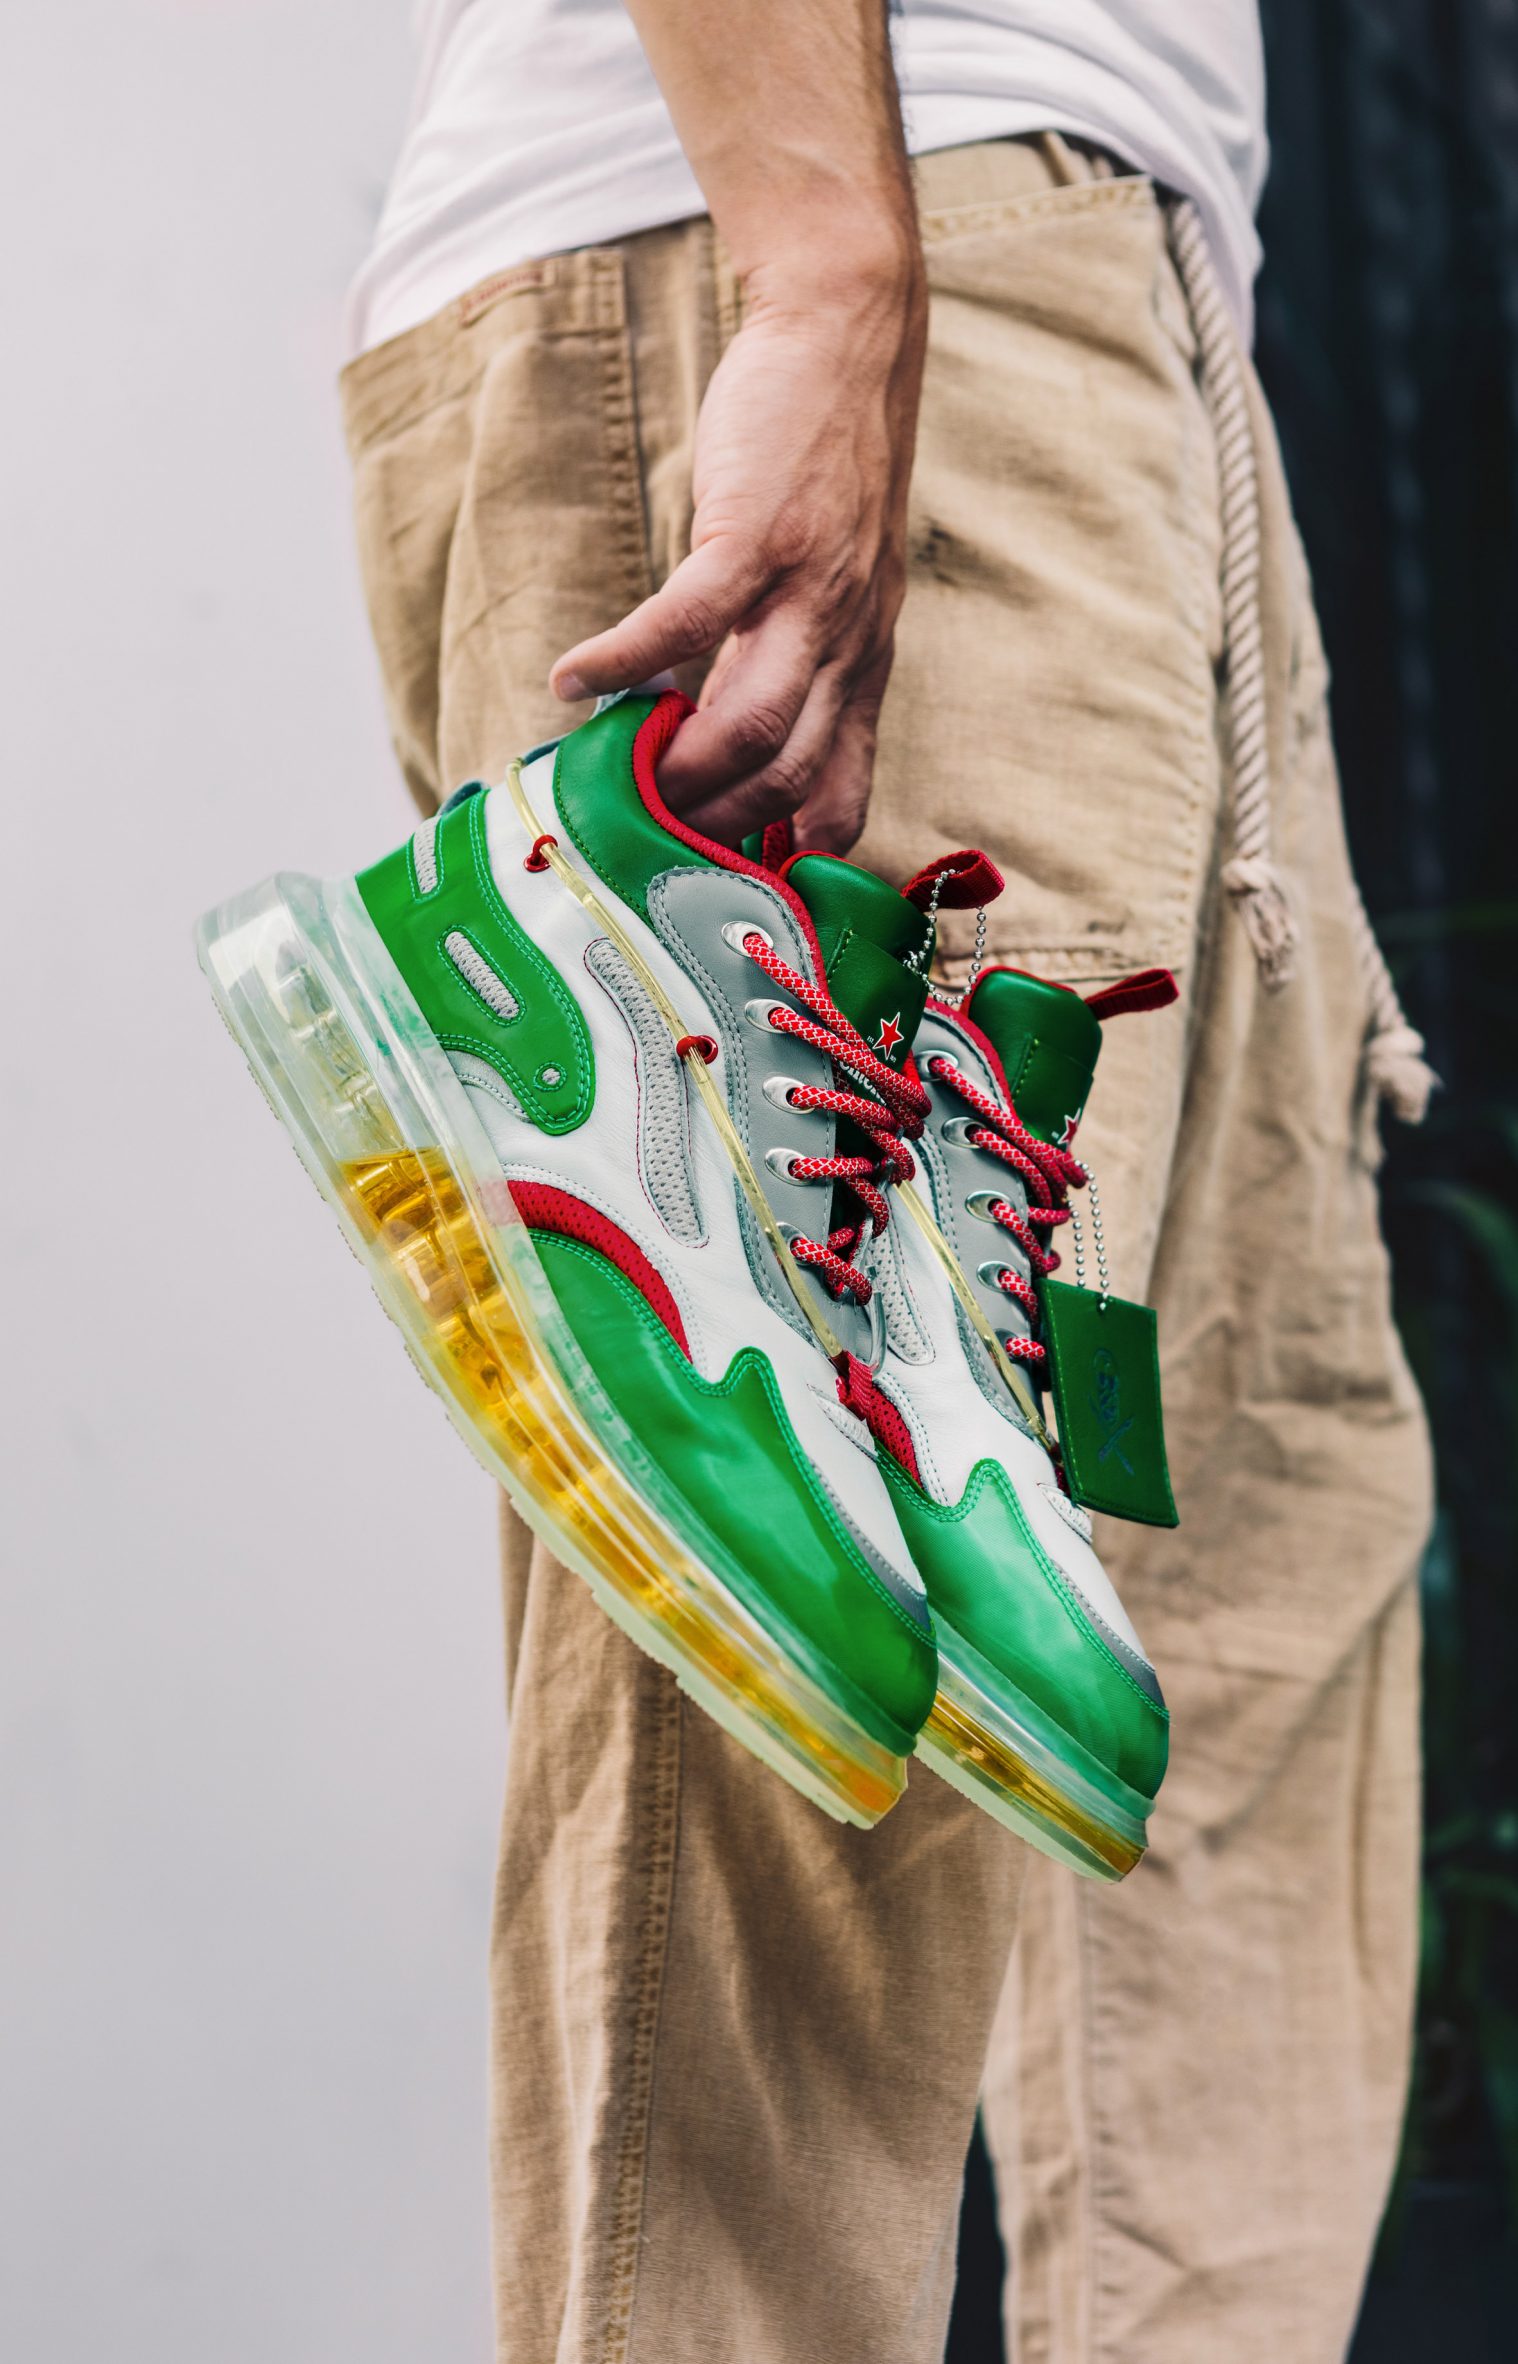 A photograph of someone holding a pair of red, white and green Heinekicks sneakers with a transparent sole filled with beer